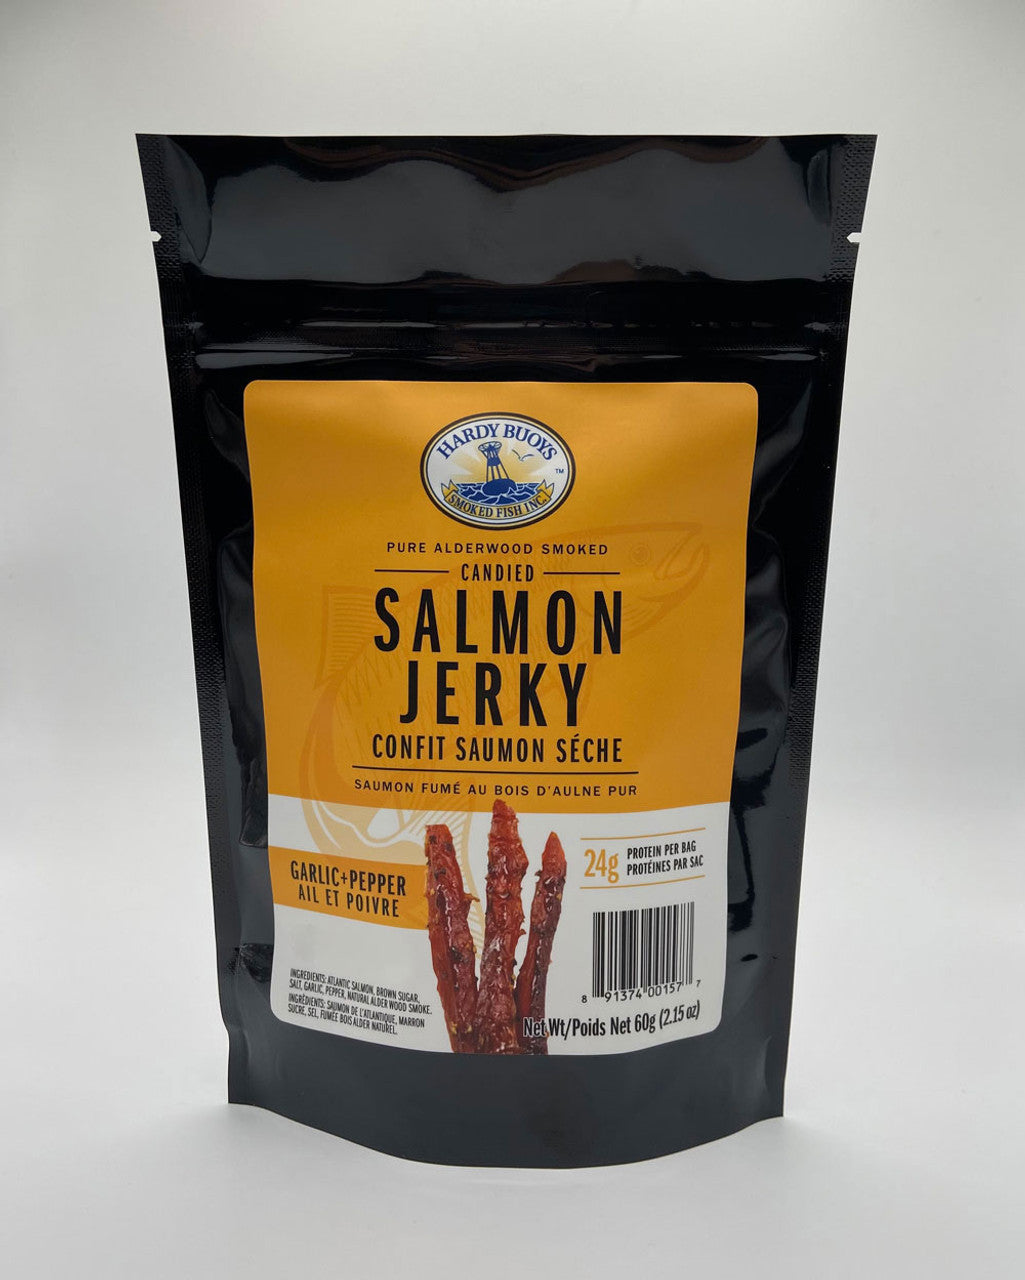 20 Pack Garlic & Pepper Candied Salmon-Jerky